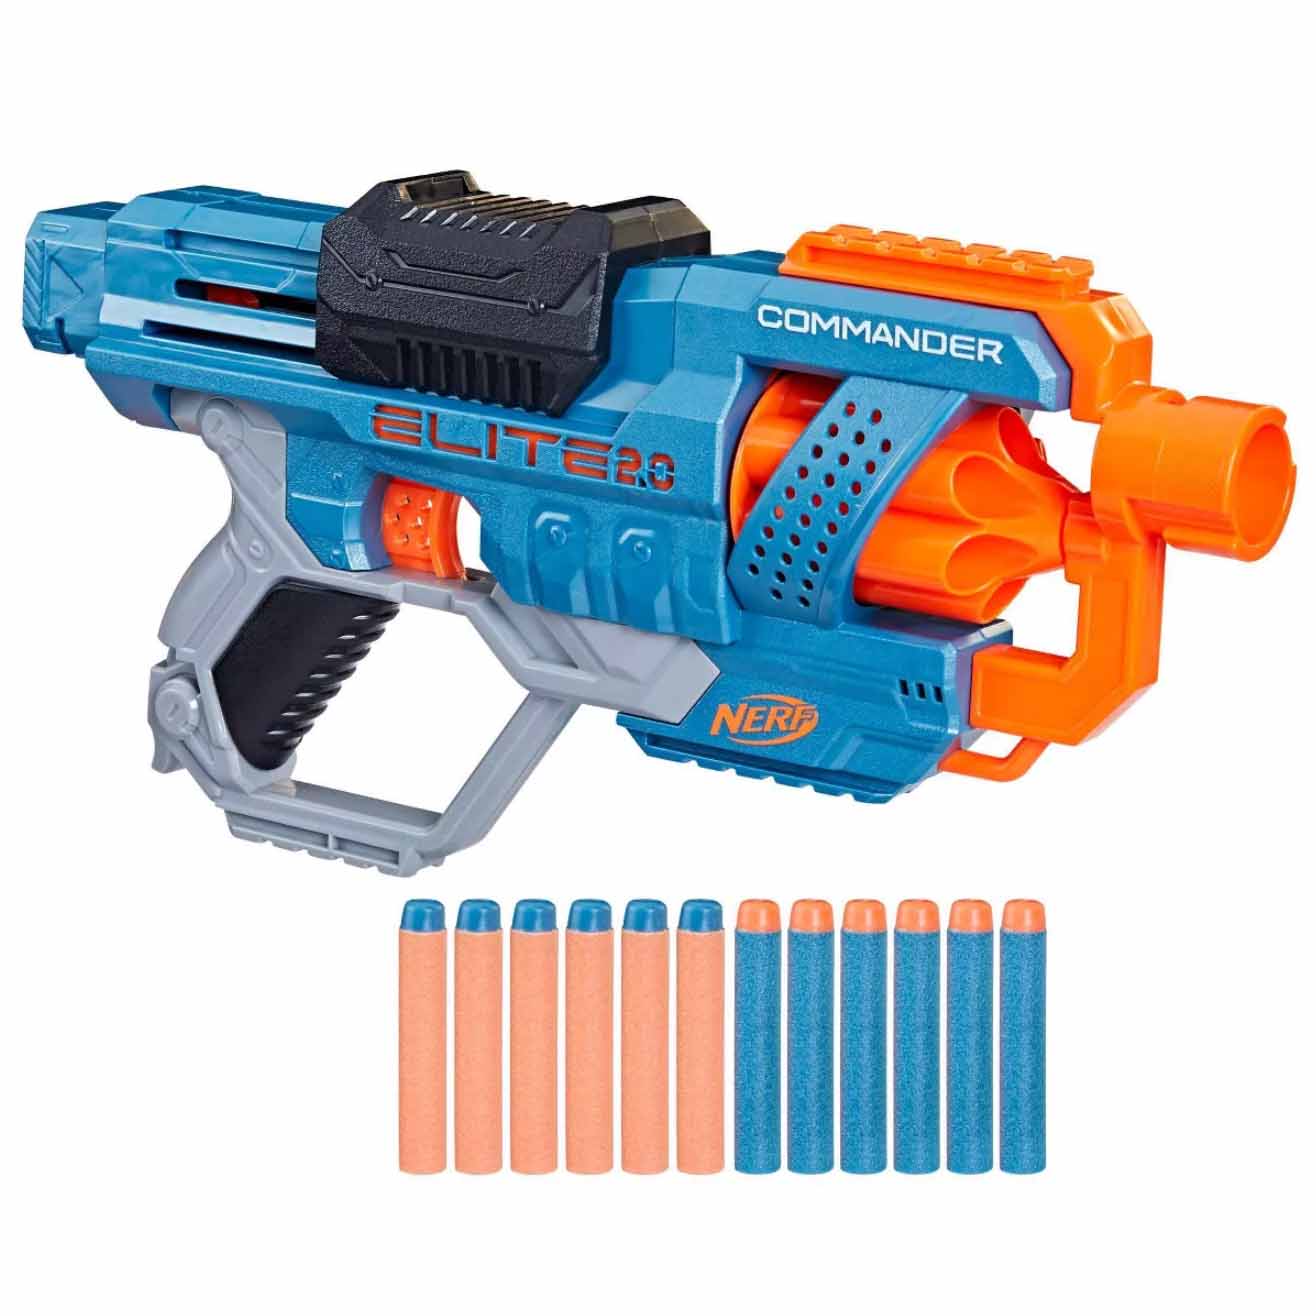 Blue and orange NERF gun with bullets